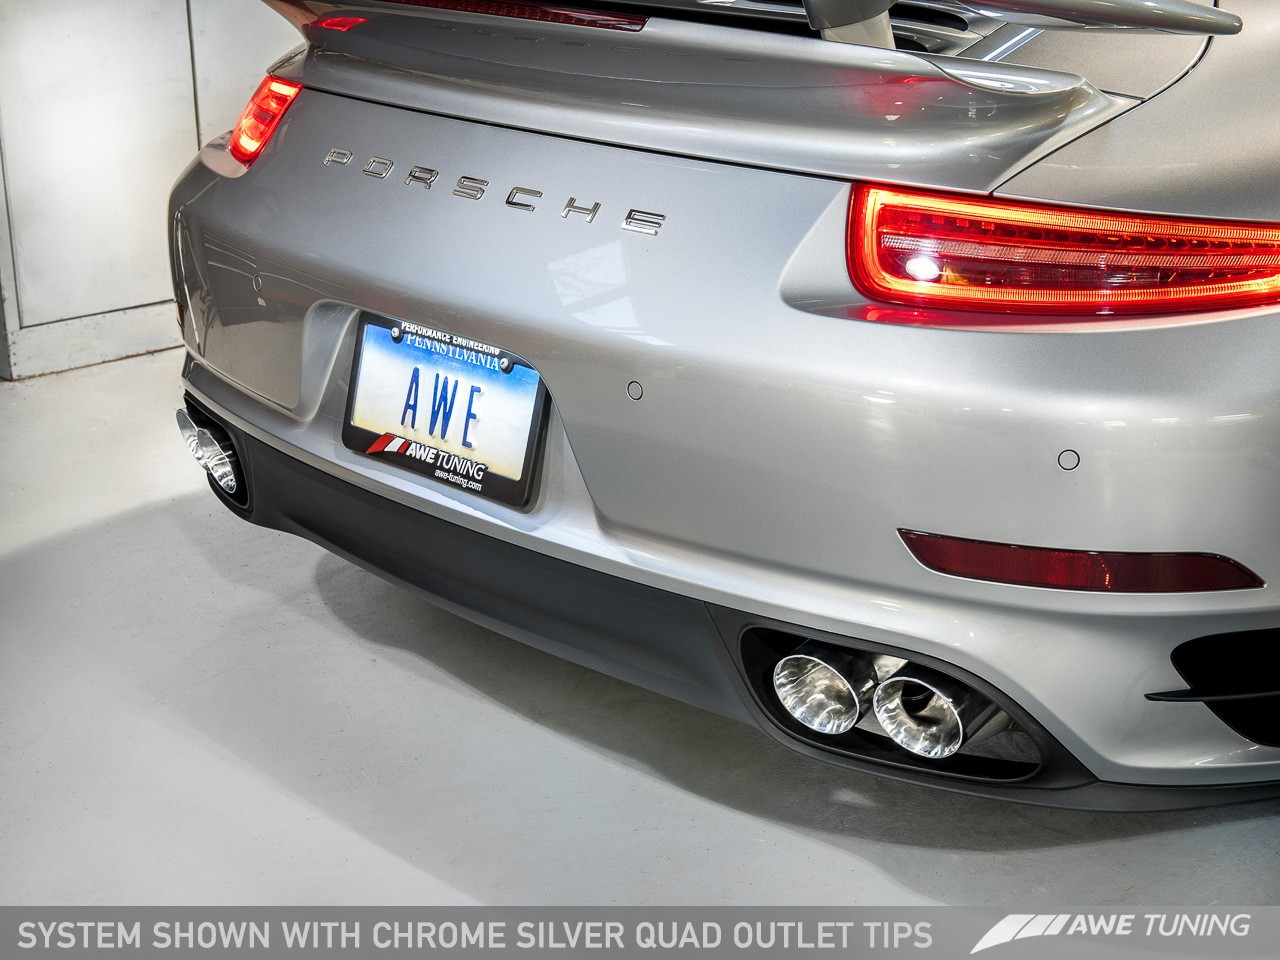 AWE Tuning Porsche 991 Turbo and Turbo S Performance Exhaust - Quad Chrome Silver Tailpipes